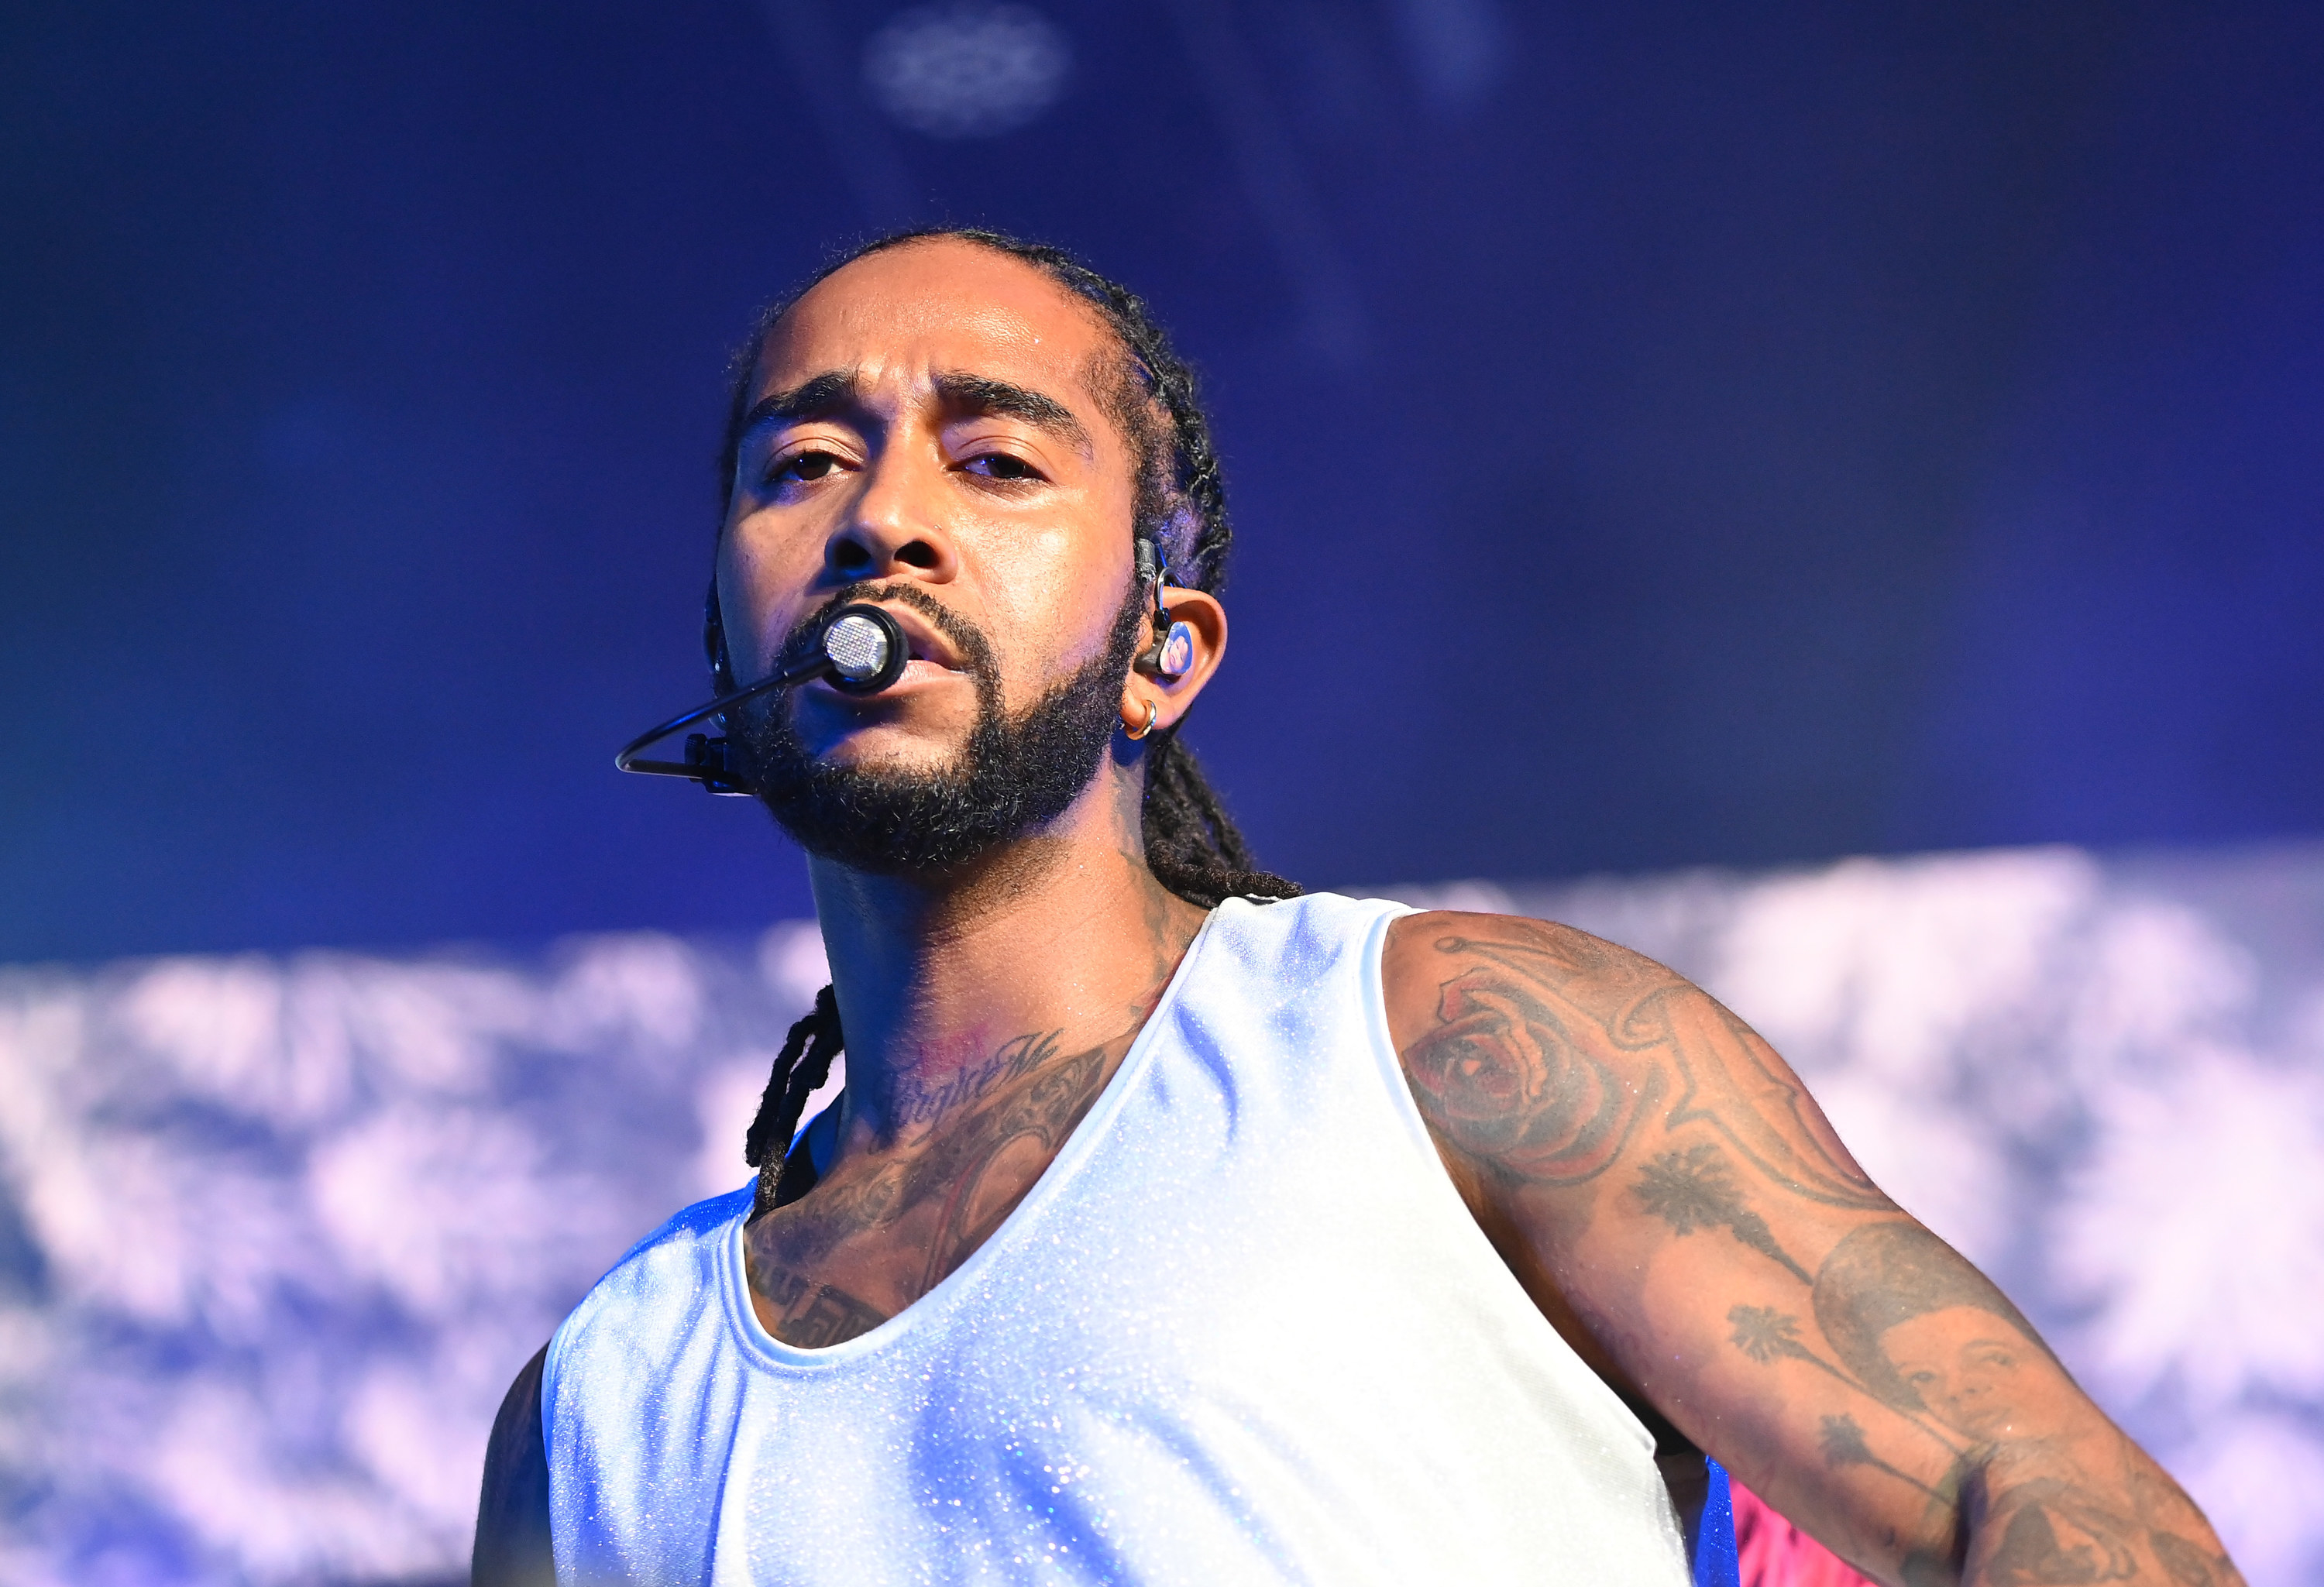 Singer Omarion performs onstage during 2021 The Millennium tour at State Farm Arena